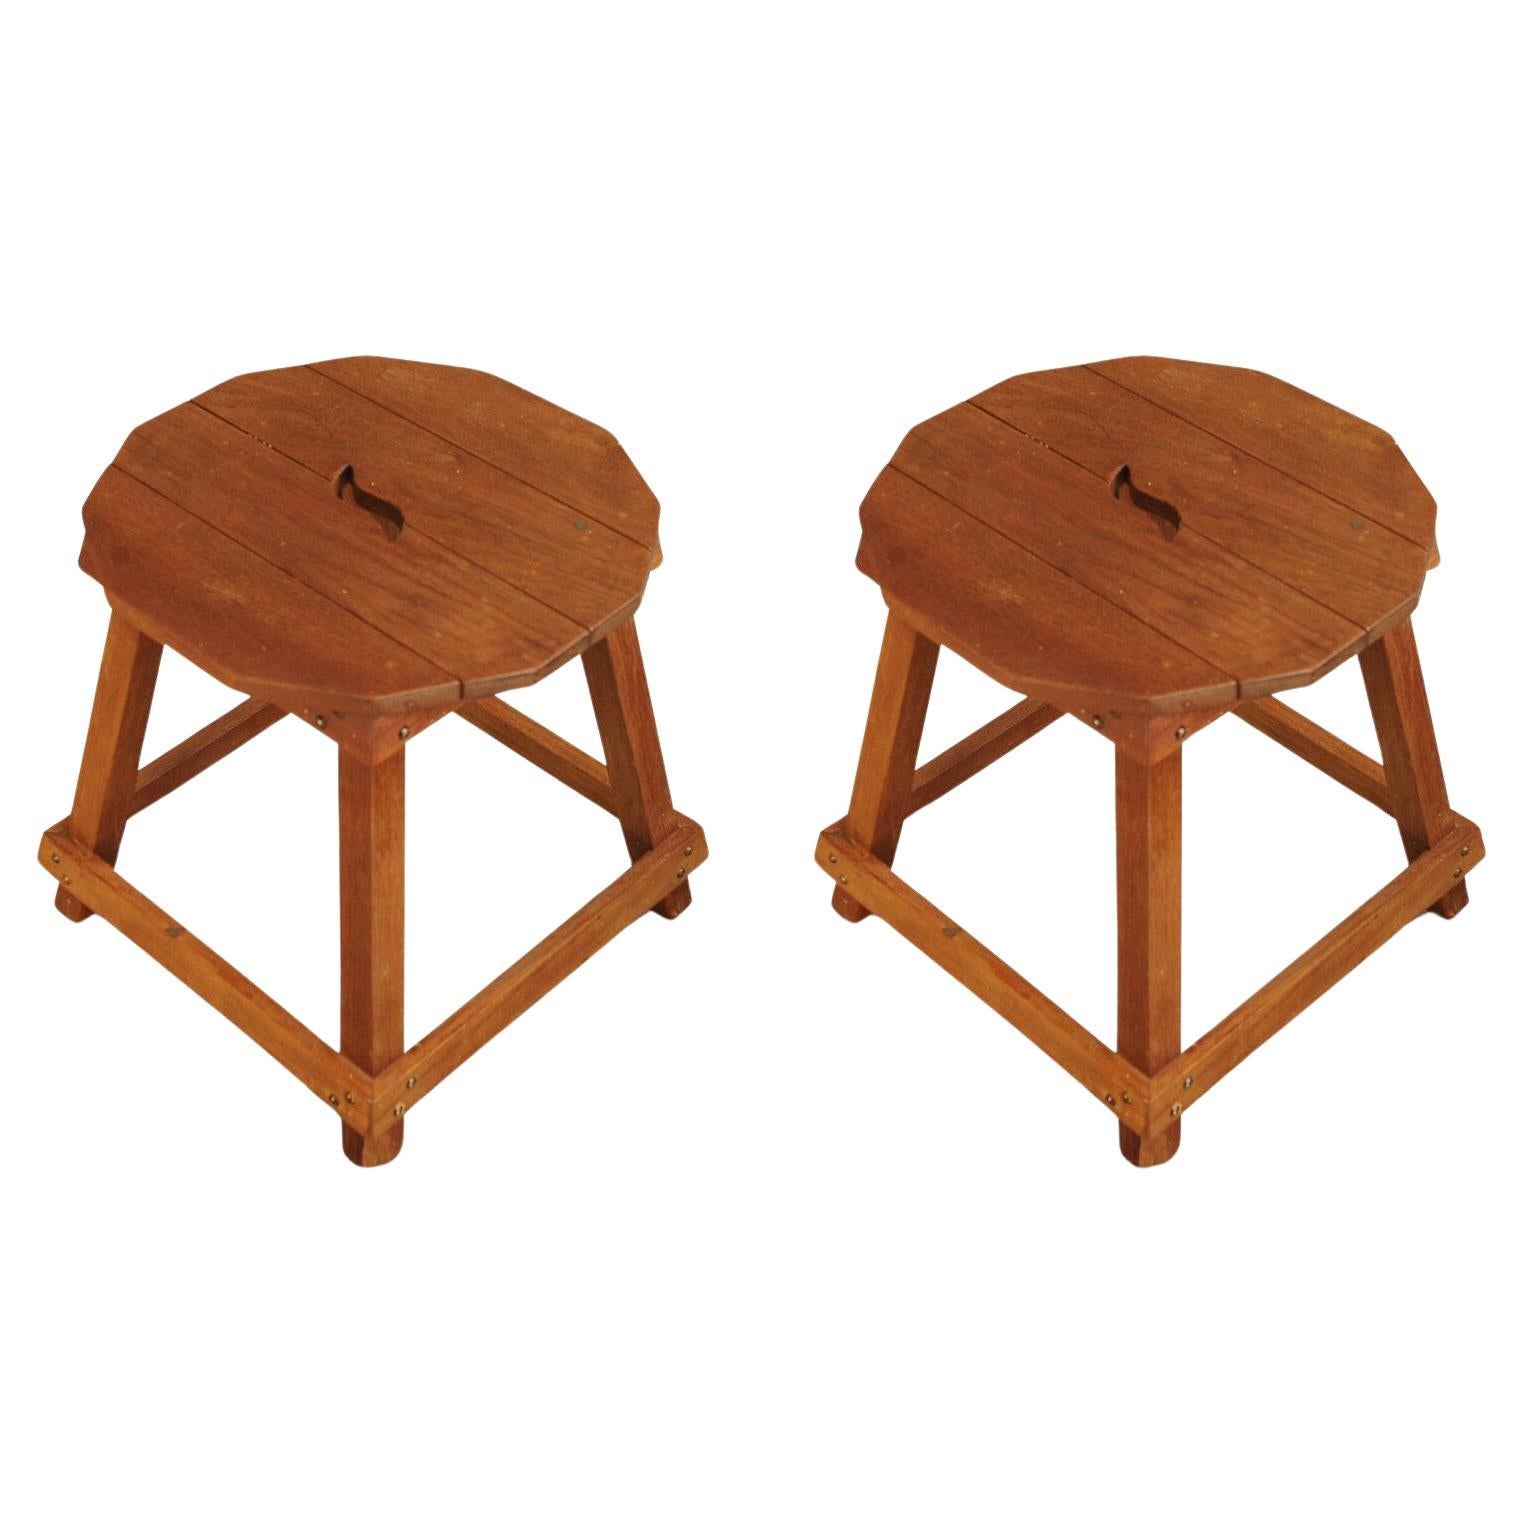 Arts and Crafts Stunning Pair Of Liberty of London Matching Arts And Crafts Primitive Oak Stools For Sale